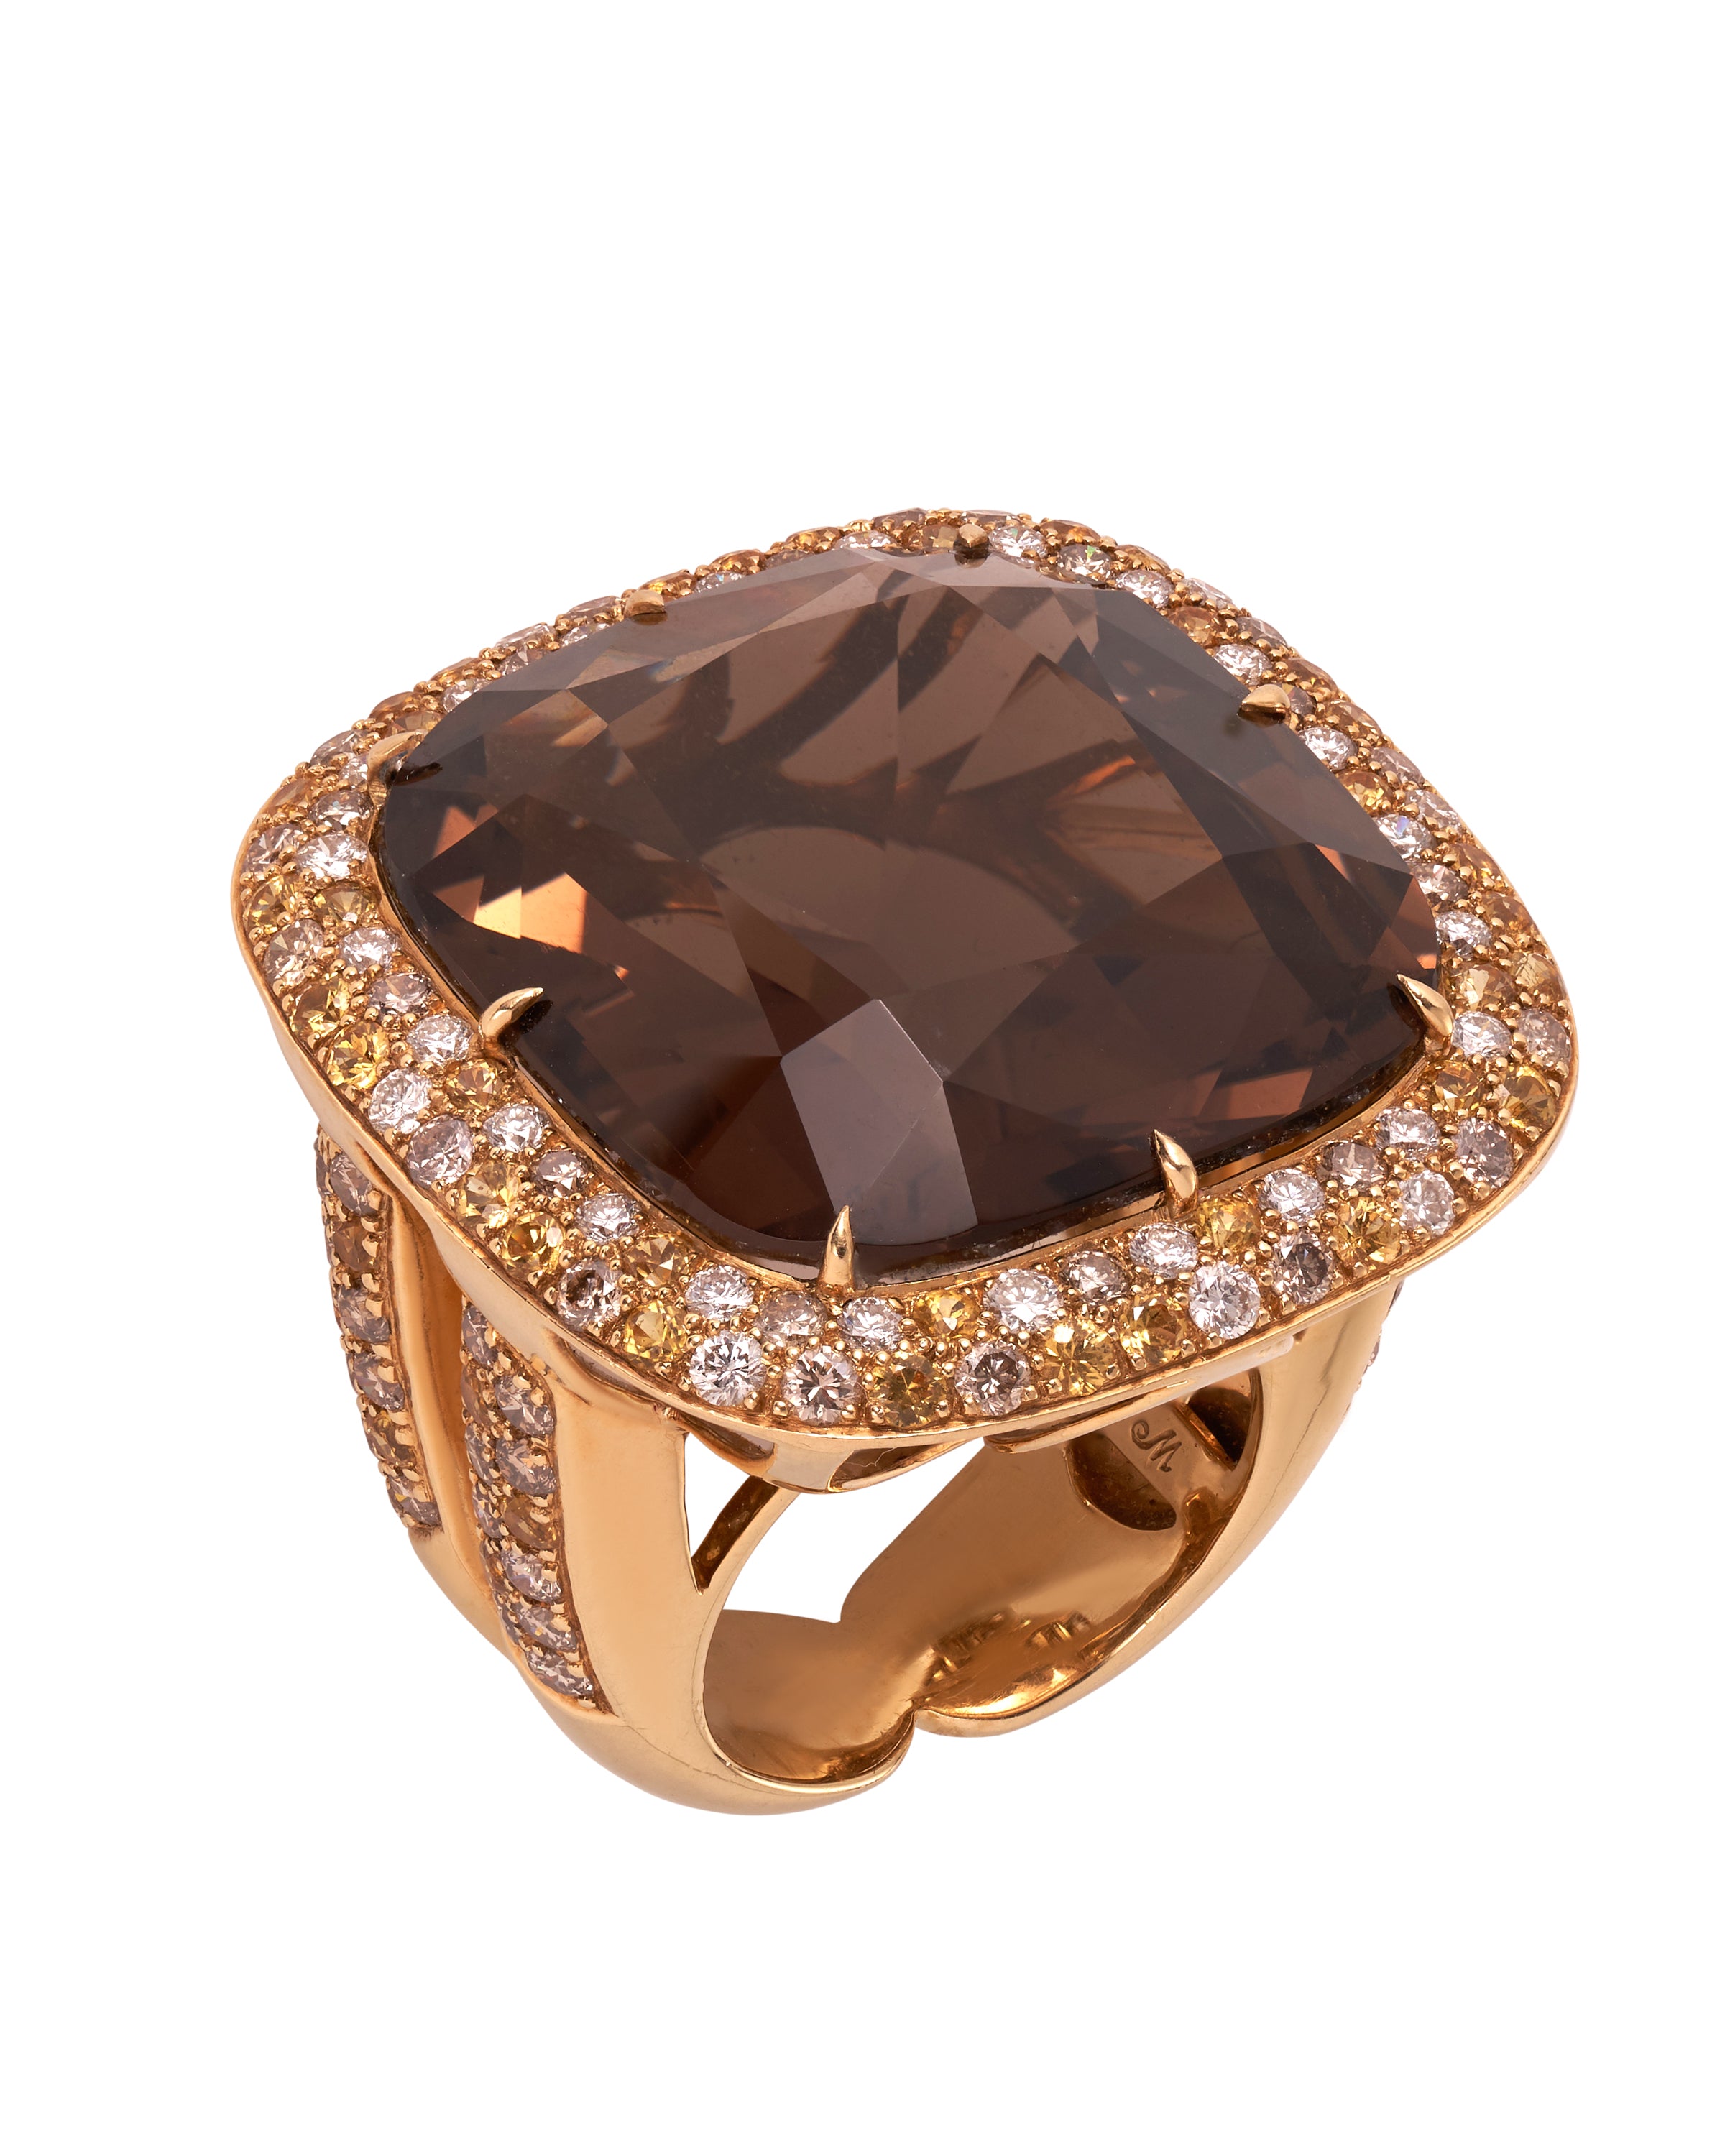 Bold Smoky Topaz cocktail ring enhanced yellow sapphires, brown and white diamonds, crafted in 18 karat yellow gold.